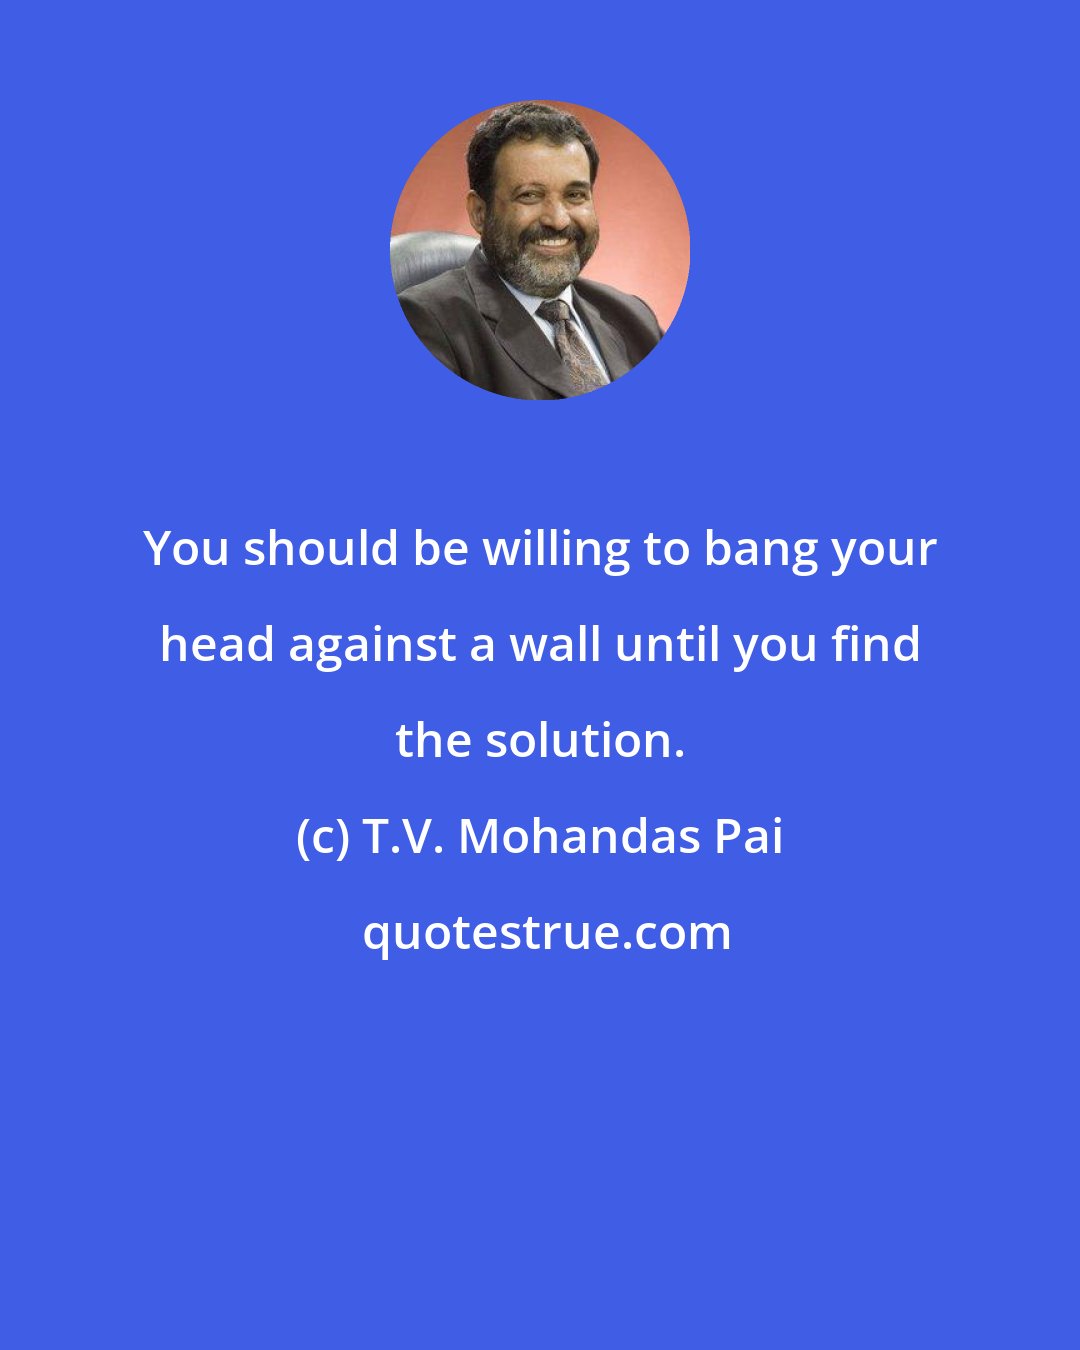 T.V. Mohandas Pai: You should be willing to bang your head against a wall until you find the solution.